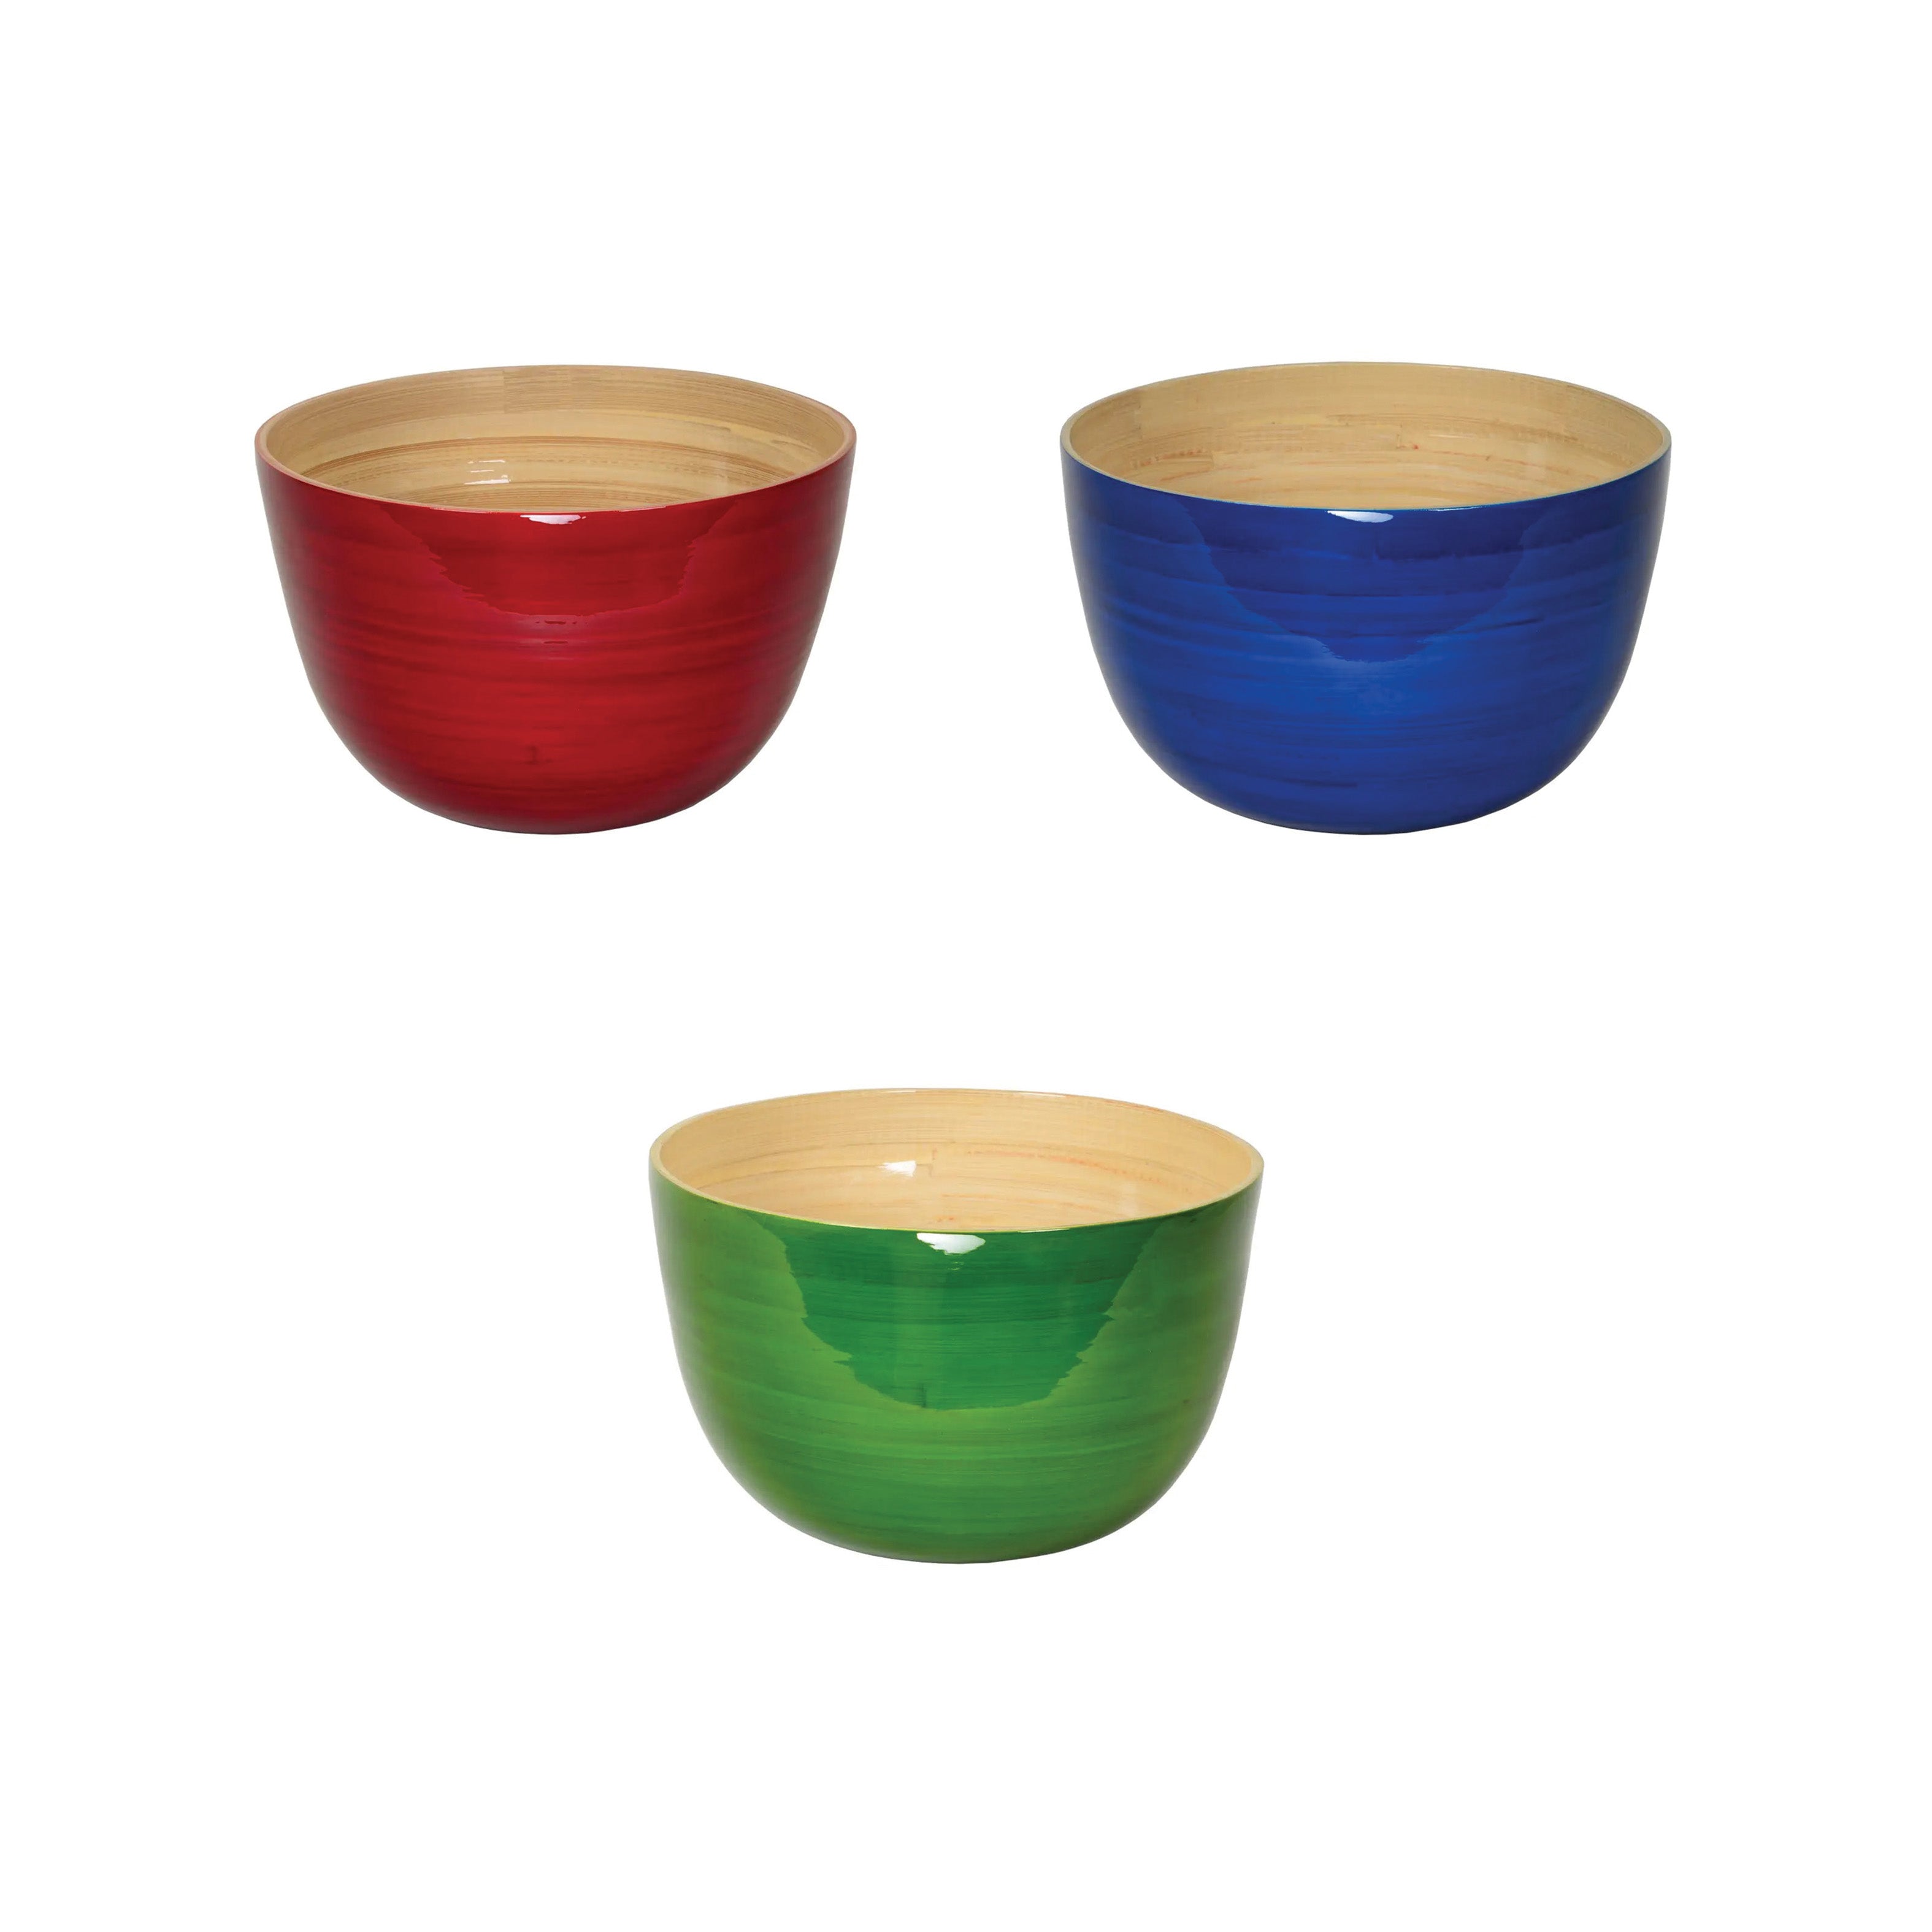 Lacquered Bamboo Bowls, 8.6" D x 5.5" H